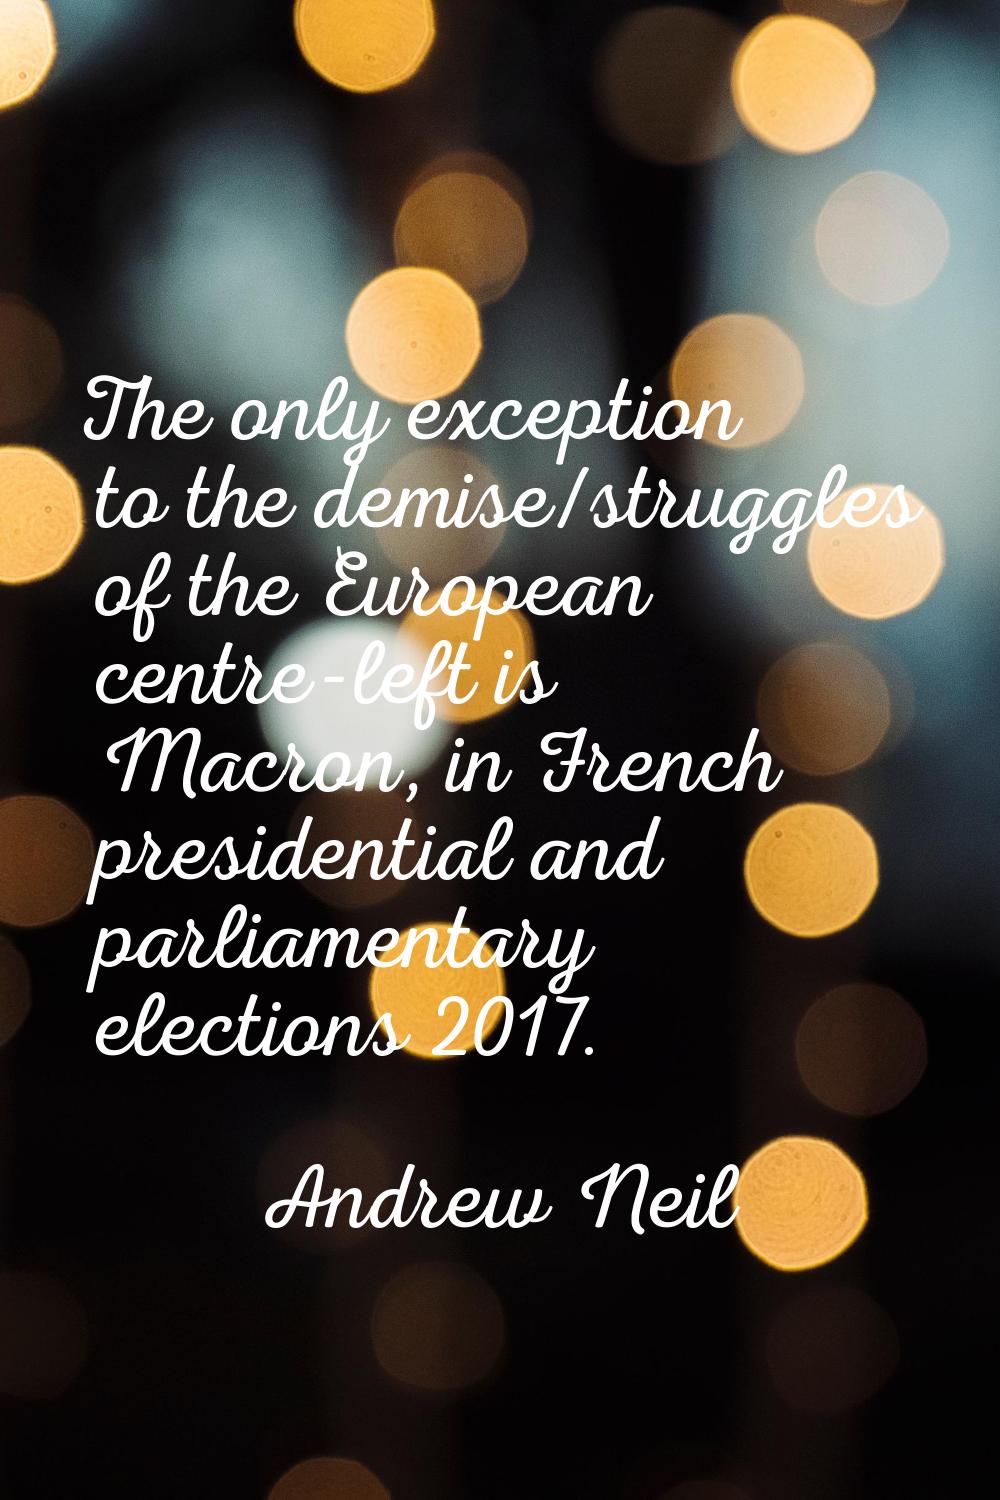 The only exception to the demise/struggles of the European centre-left is Macron, in French preside